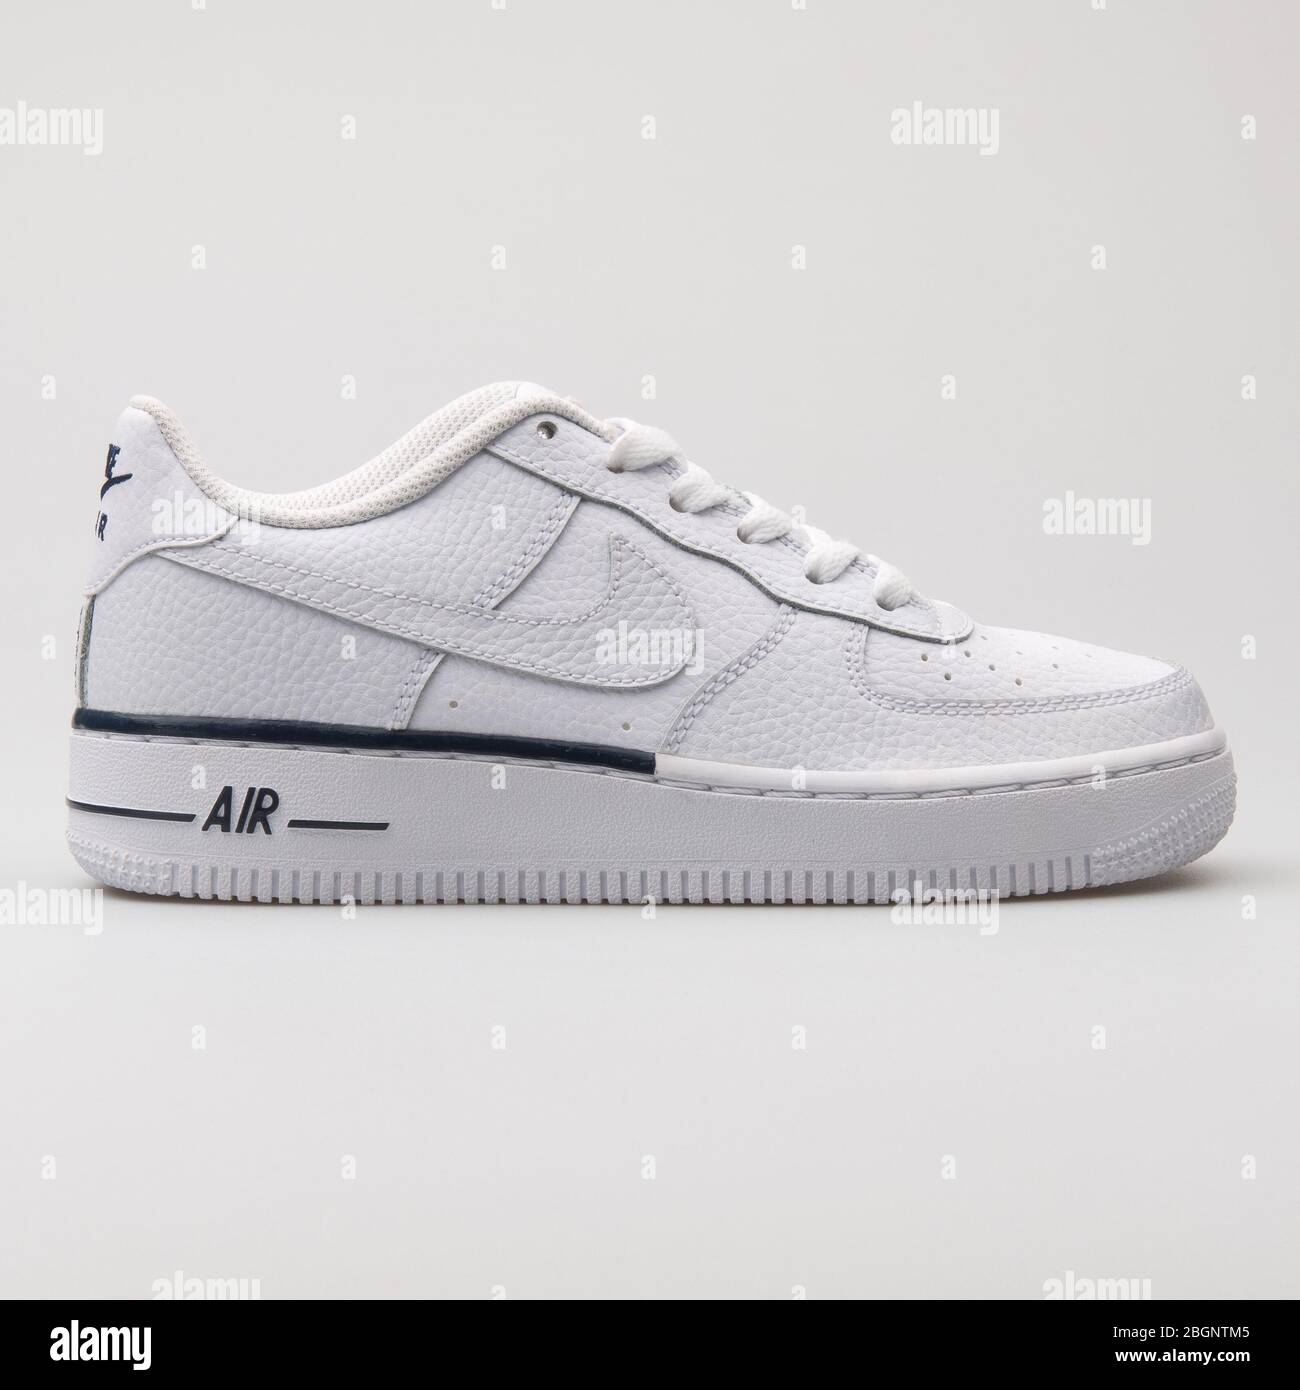 VIENNA, AUSTRIA - AUGUST 29, 2017: Nike Air Force 1 white and black sneaker  on white background Stock Photo - Alamy